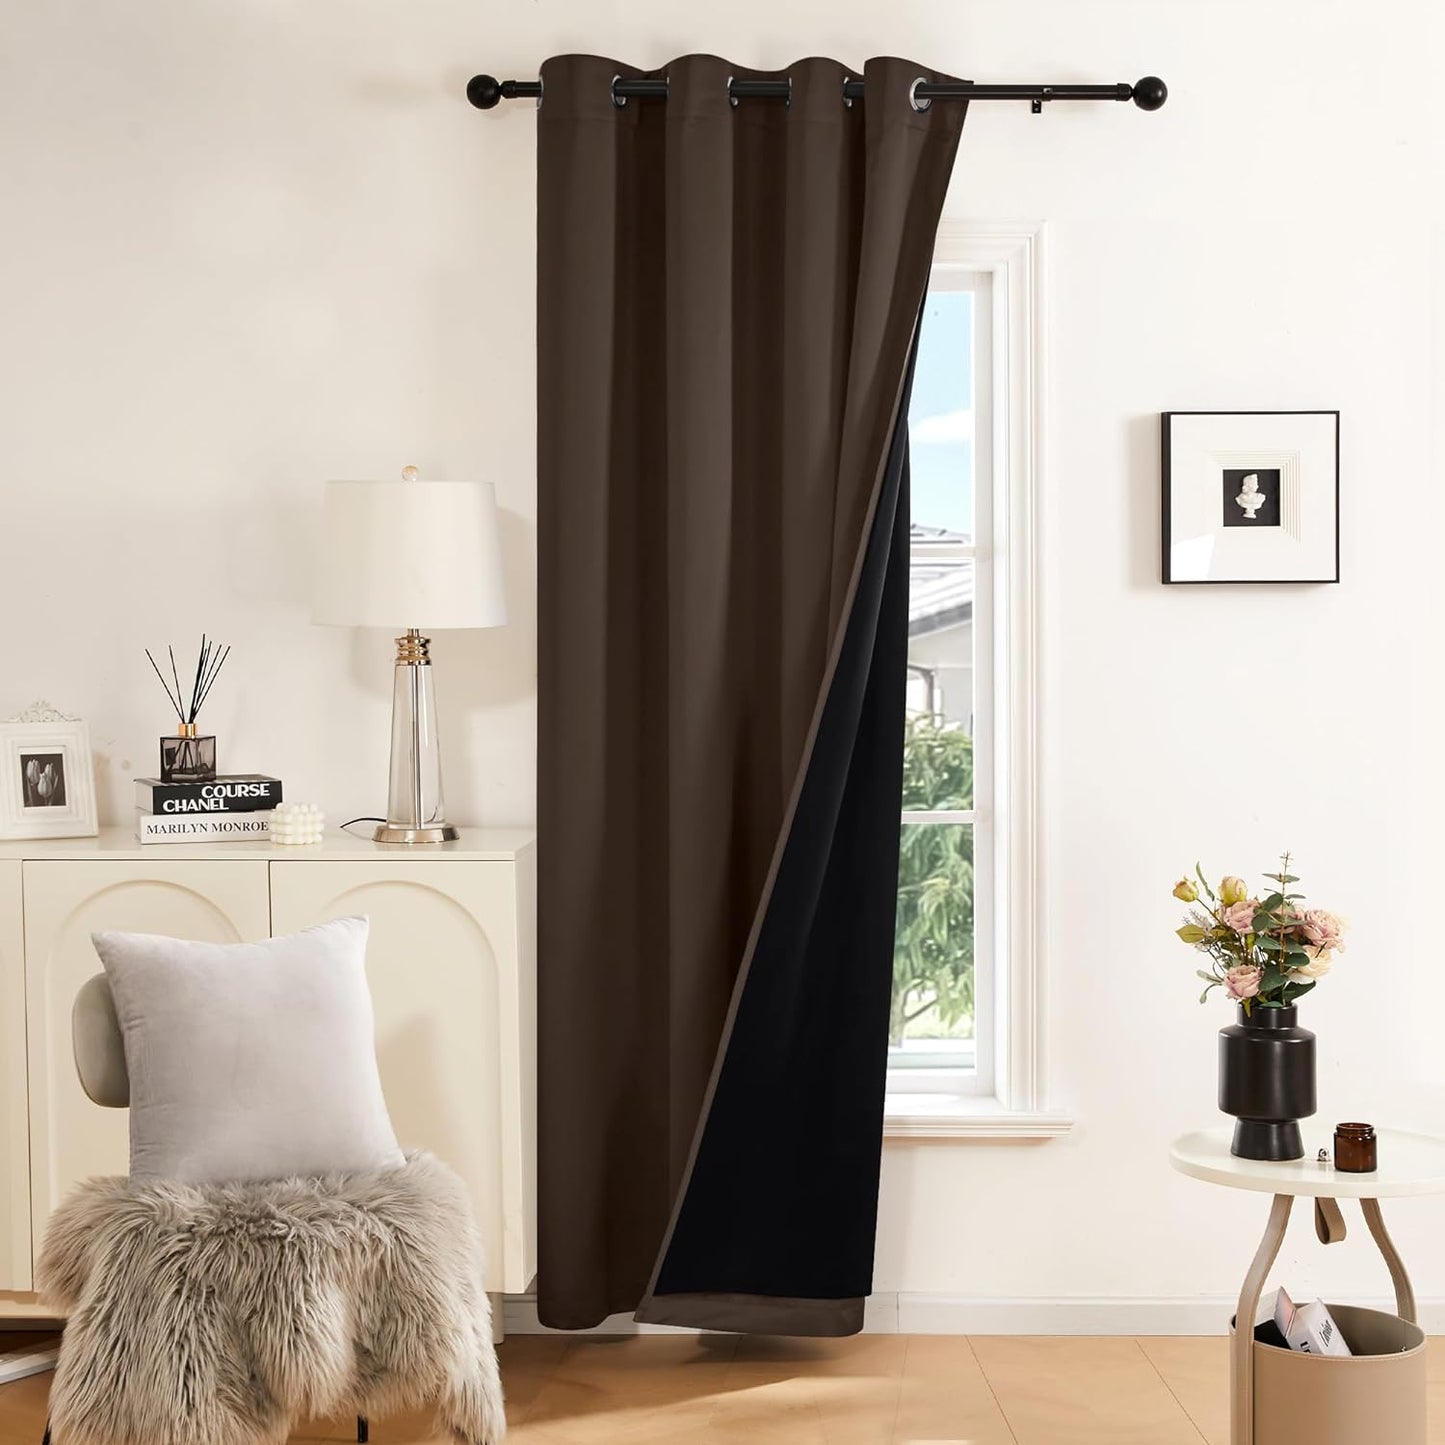 Deconovo 100% White Blackout Curtains, Double Layer Sliding Door Curtain for Living Room, Extra Wide Room Divder Curtains for Patio Door (100W X 84L Inches, Pure White, 1 Panel)  DECONOVO Brown 52W X 84L Inch 